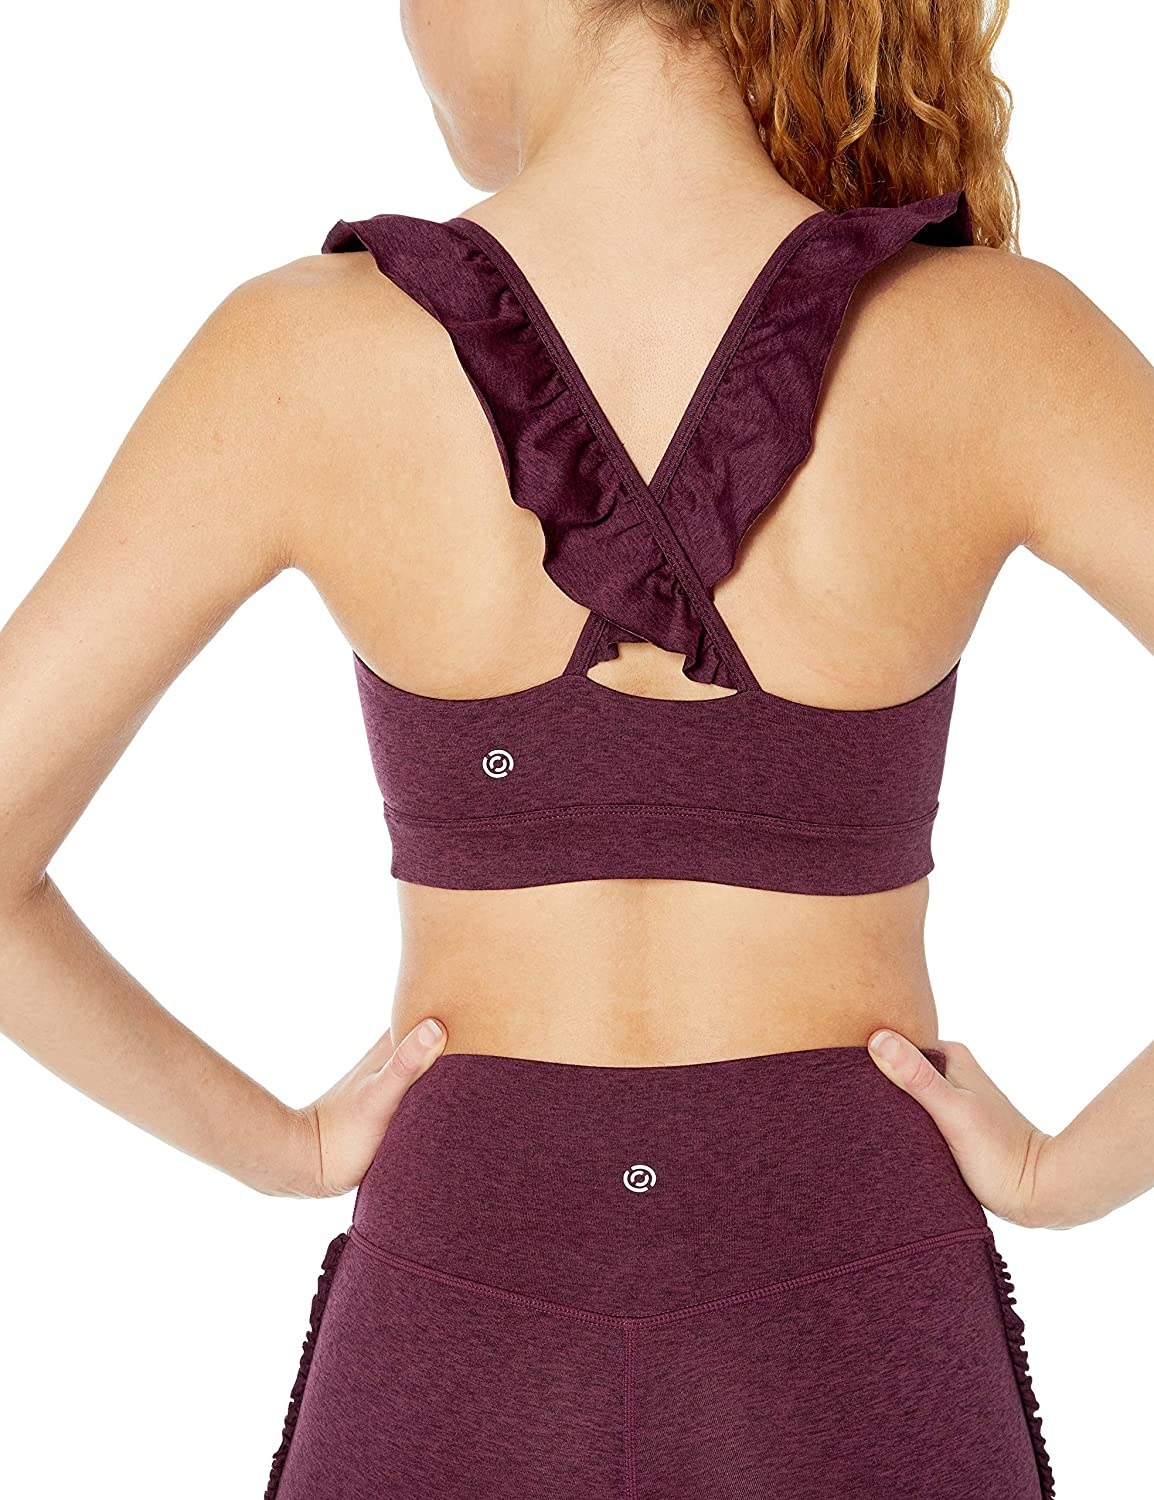 The plum-colored bra with ruffles on the straps